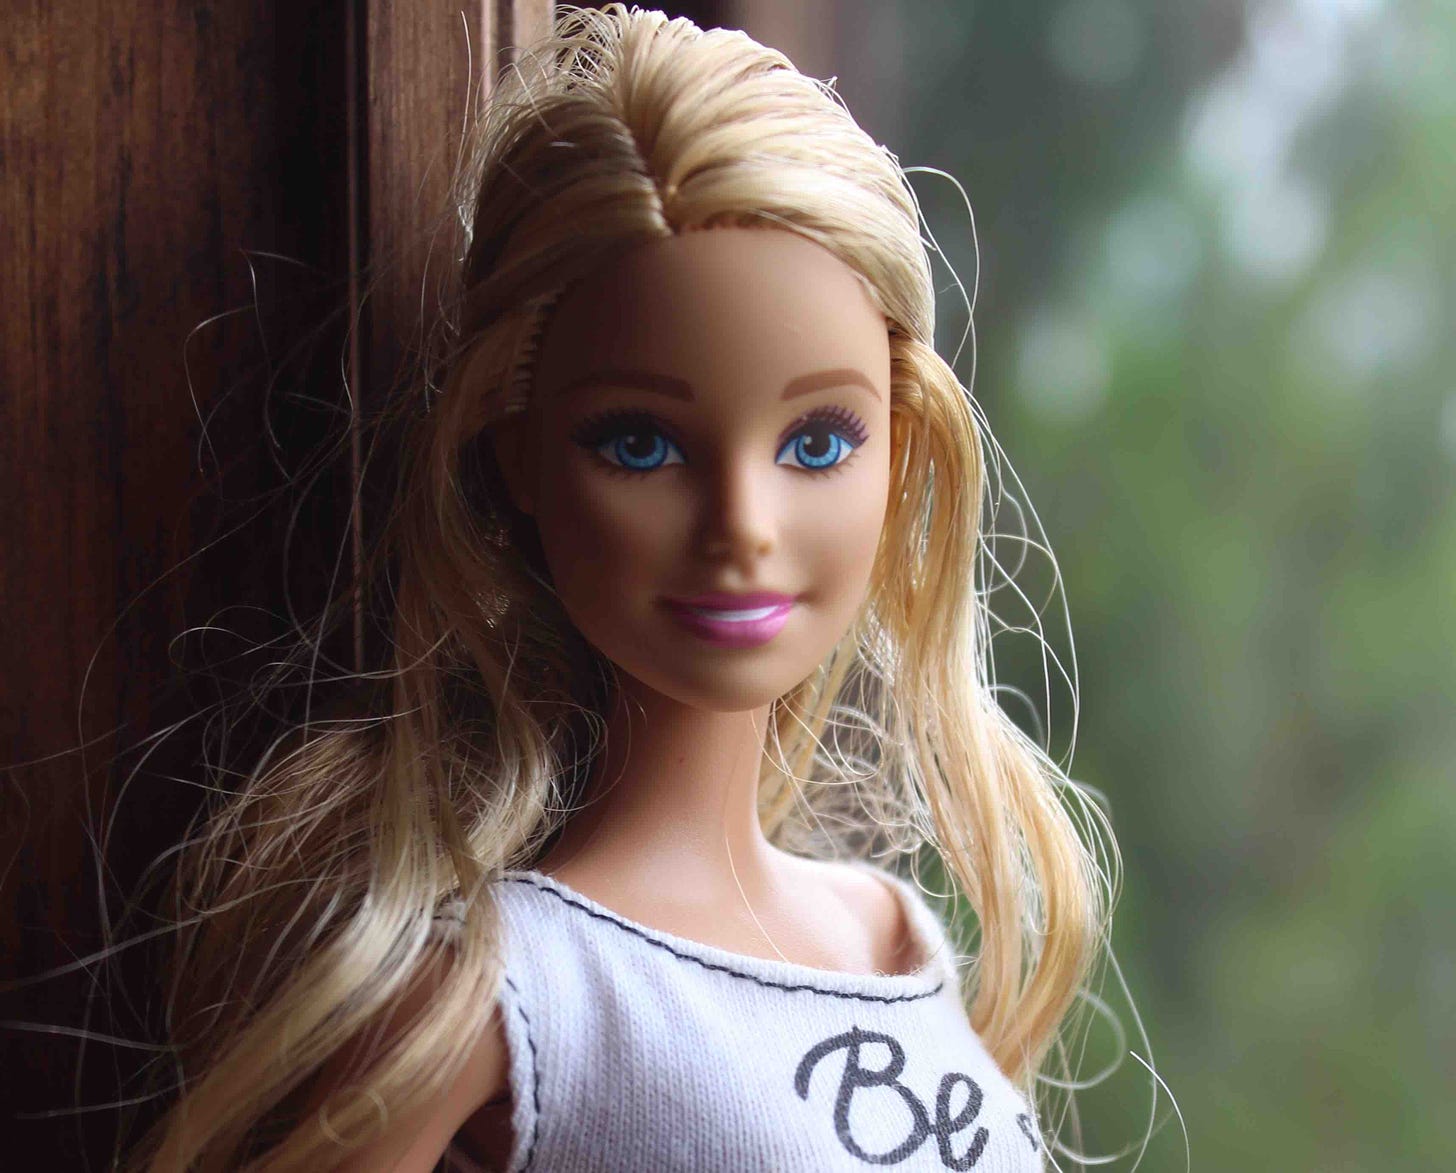 Blonde Barbie doll in front of a window